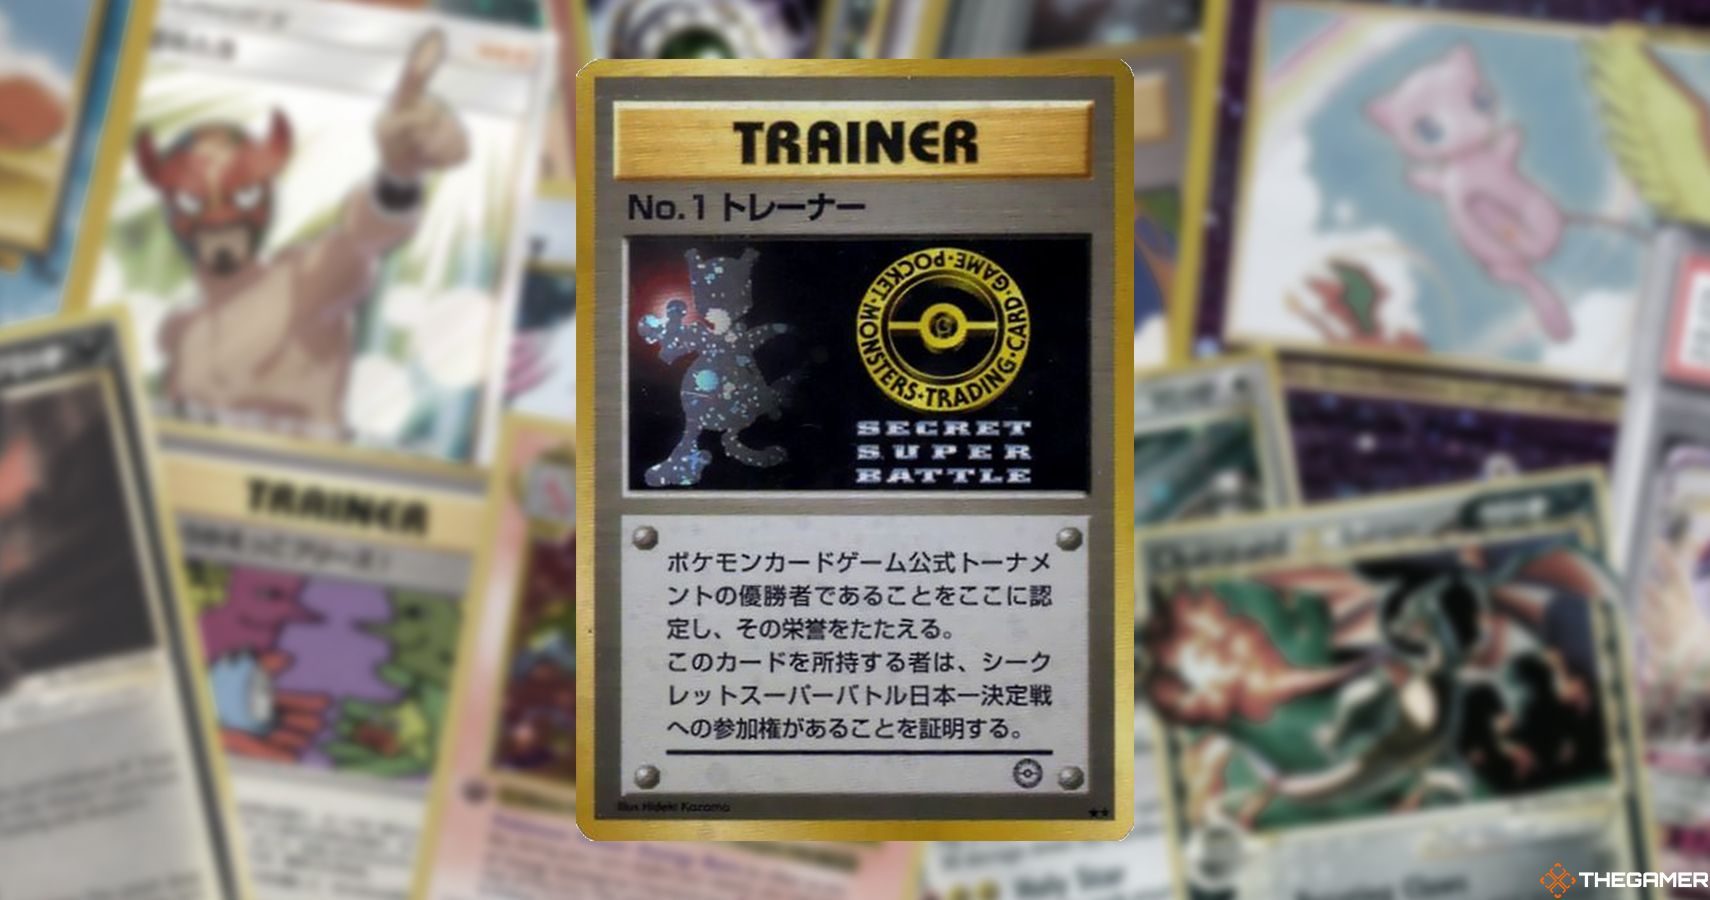 The 25 Rarest Pokemon Cards (And What They’re Worth)